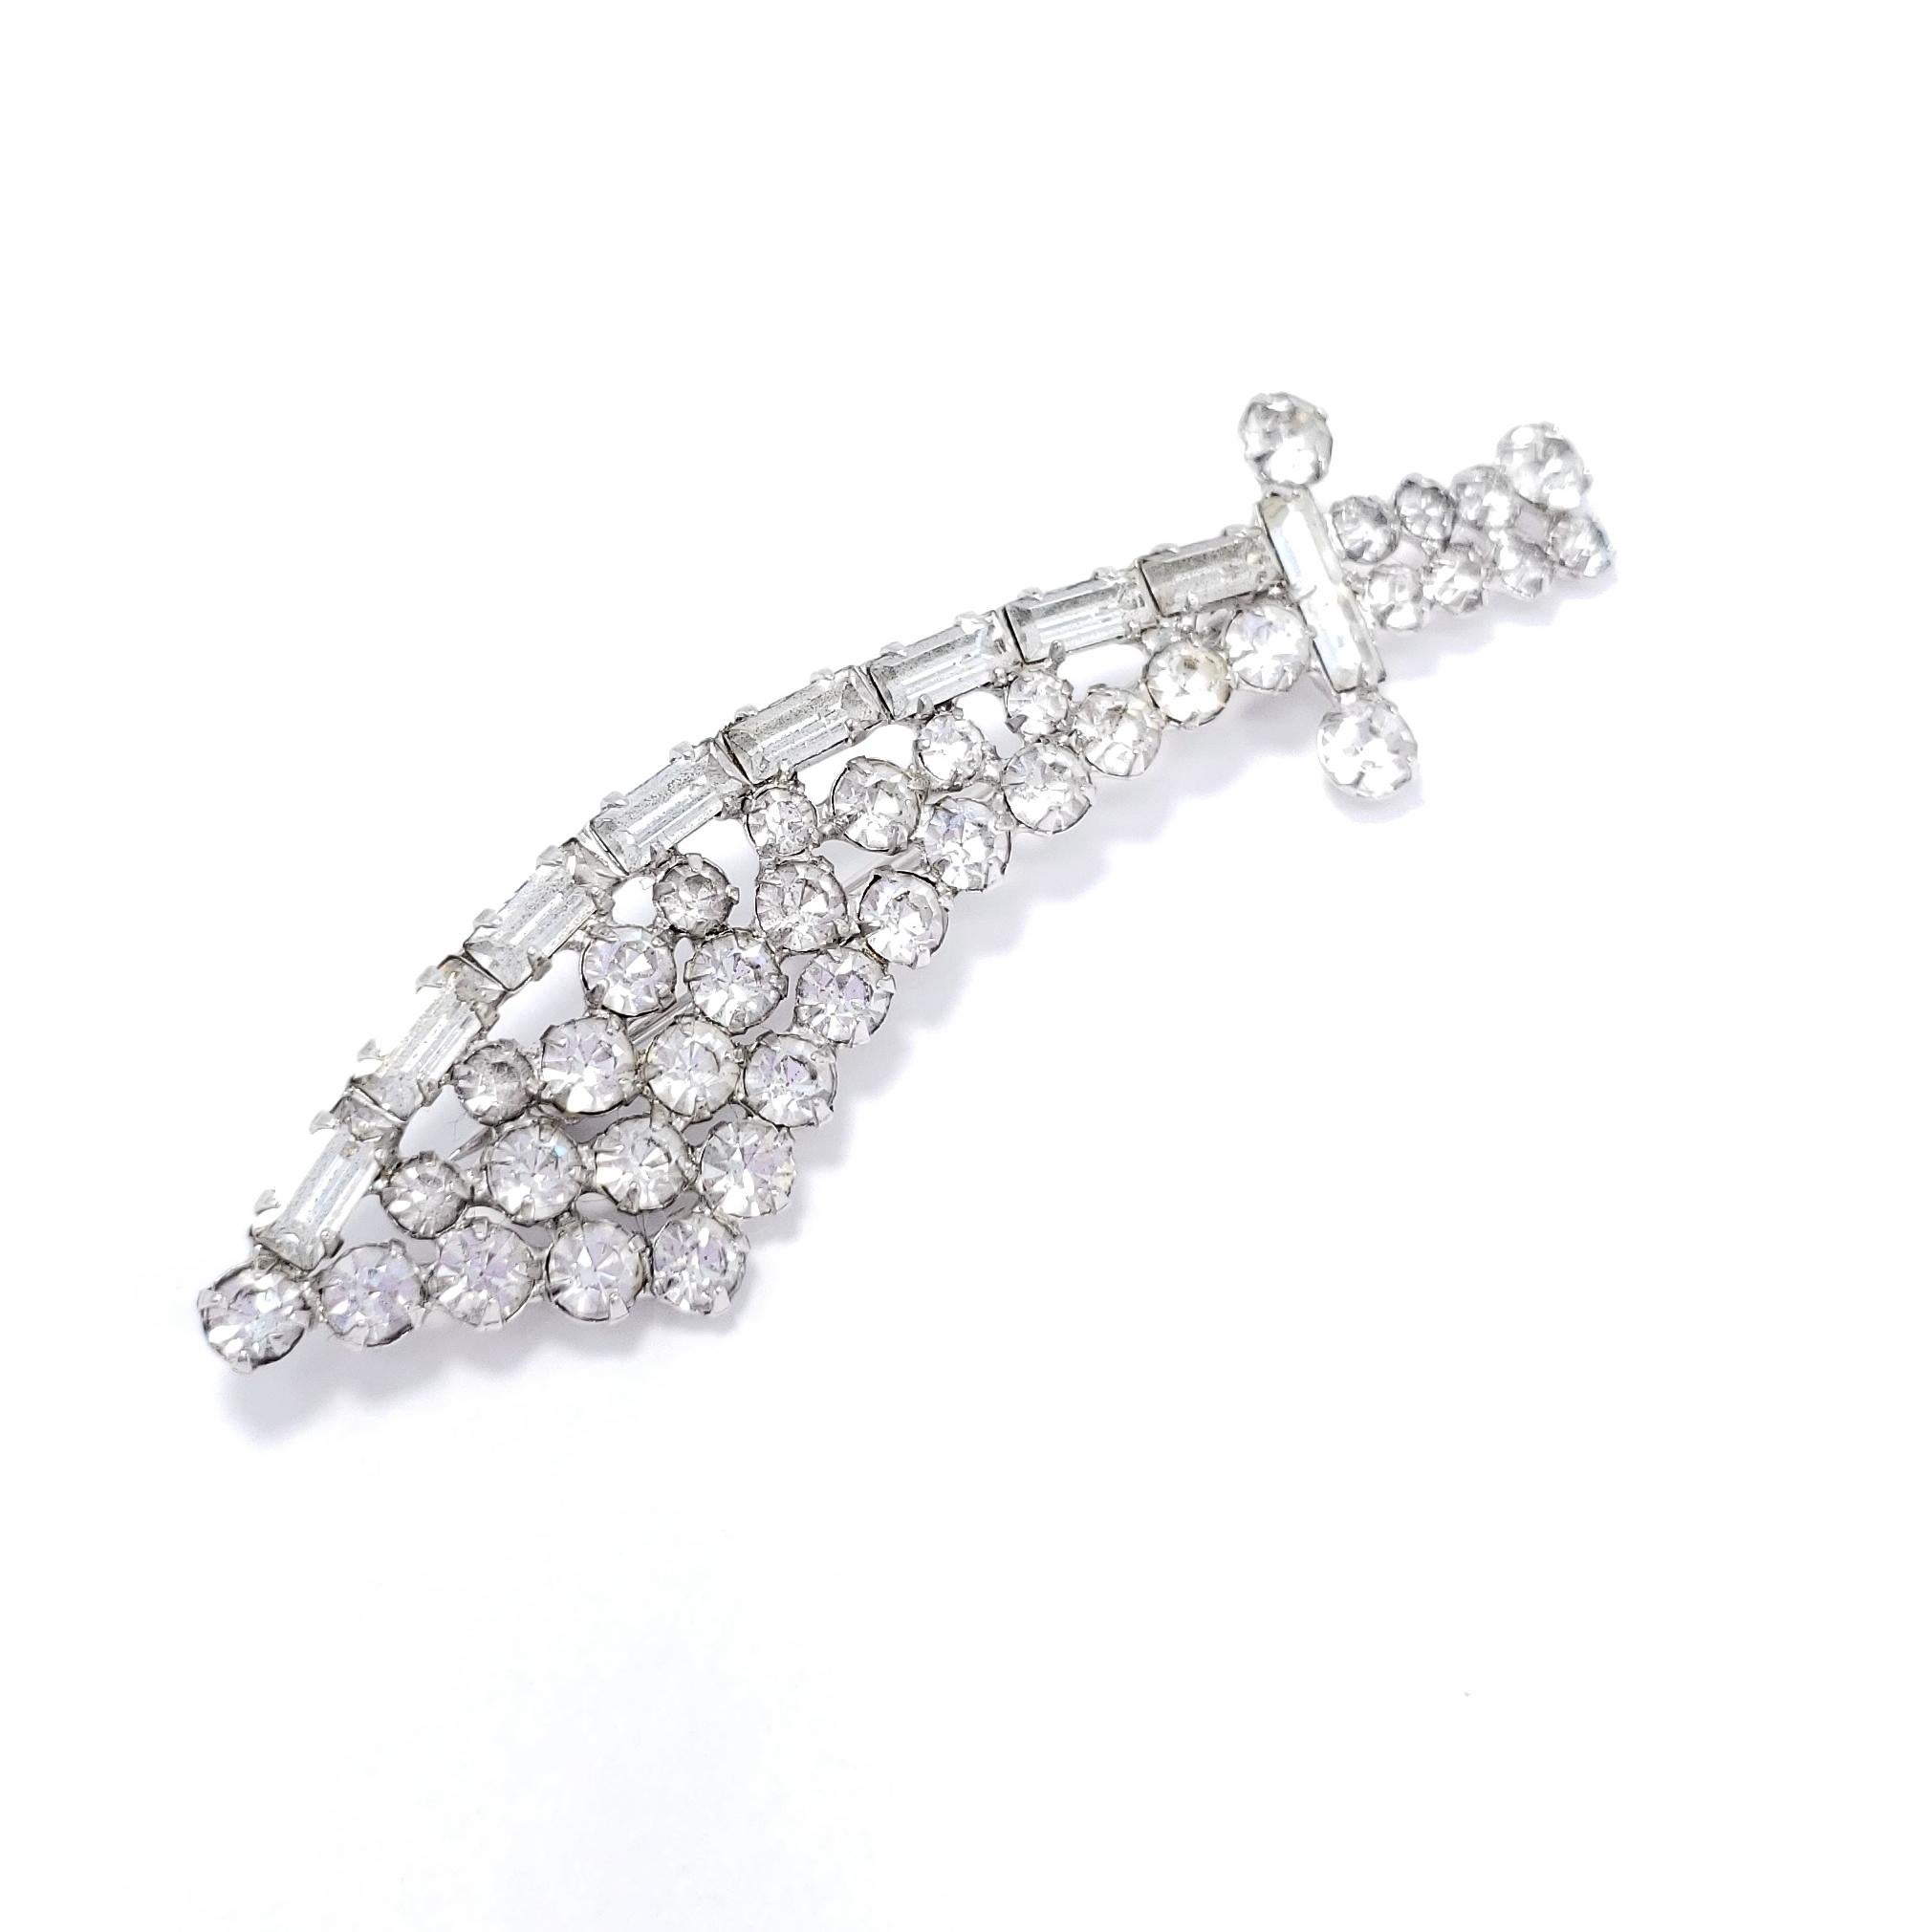 A dazzling saber pin, decorated with sparkling clear crystals! Silver tone.

Hallmarks: n/a